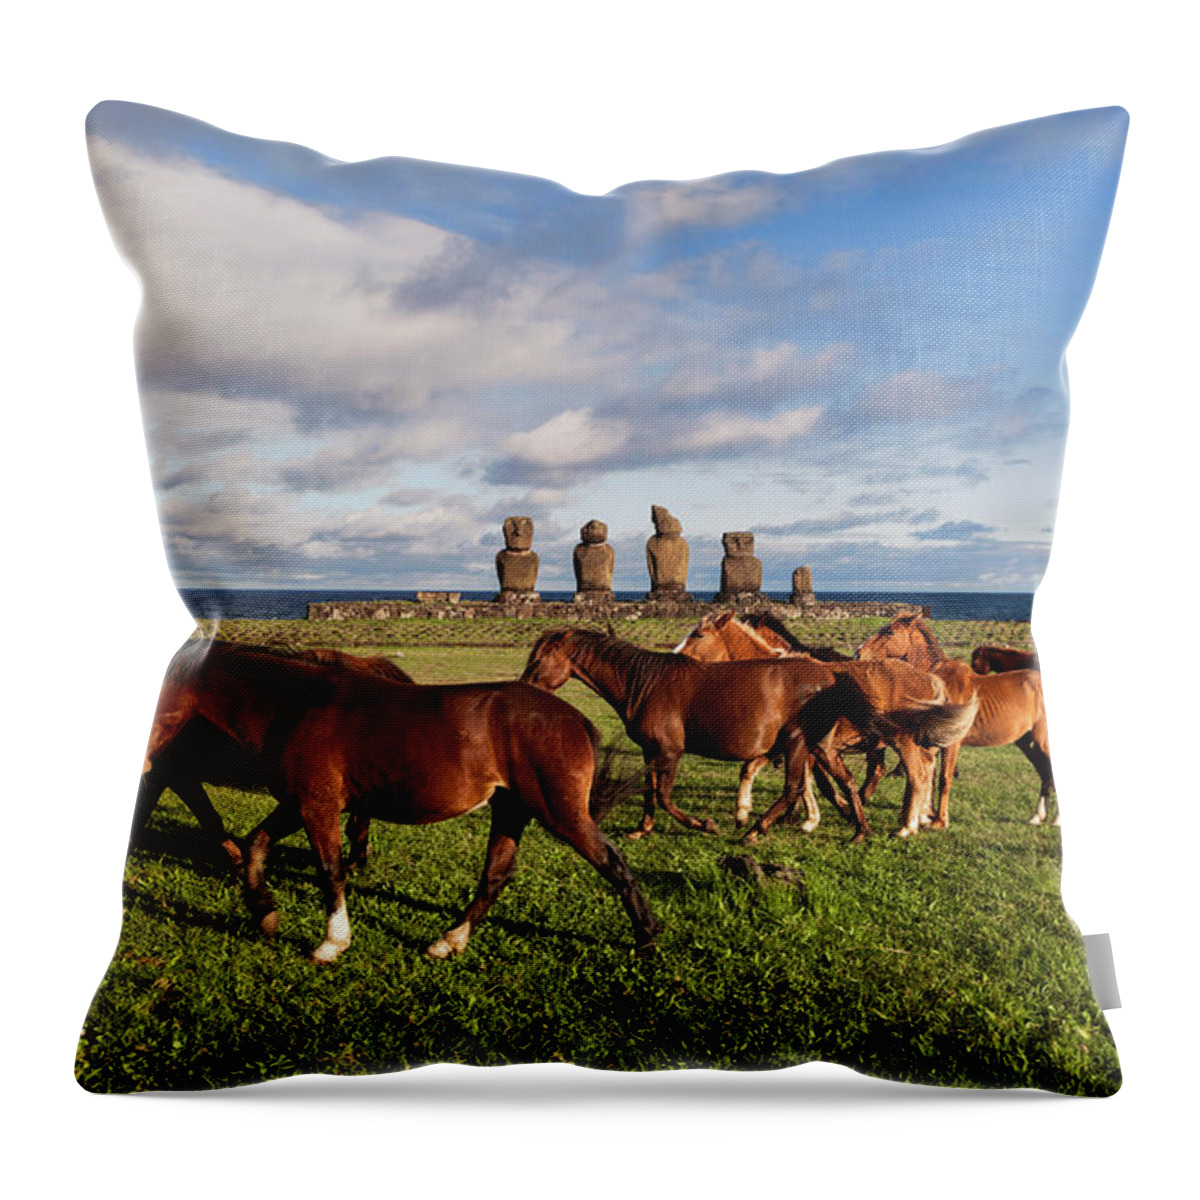 Horse Throw Pillow featuring the photograph Ahu Taha In Easter Island by Luis Davilla